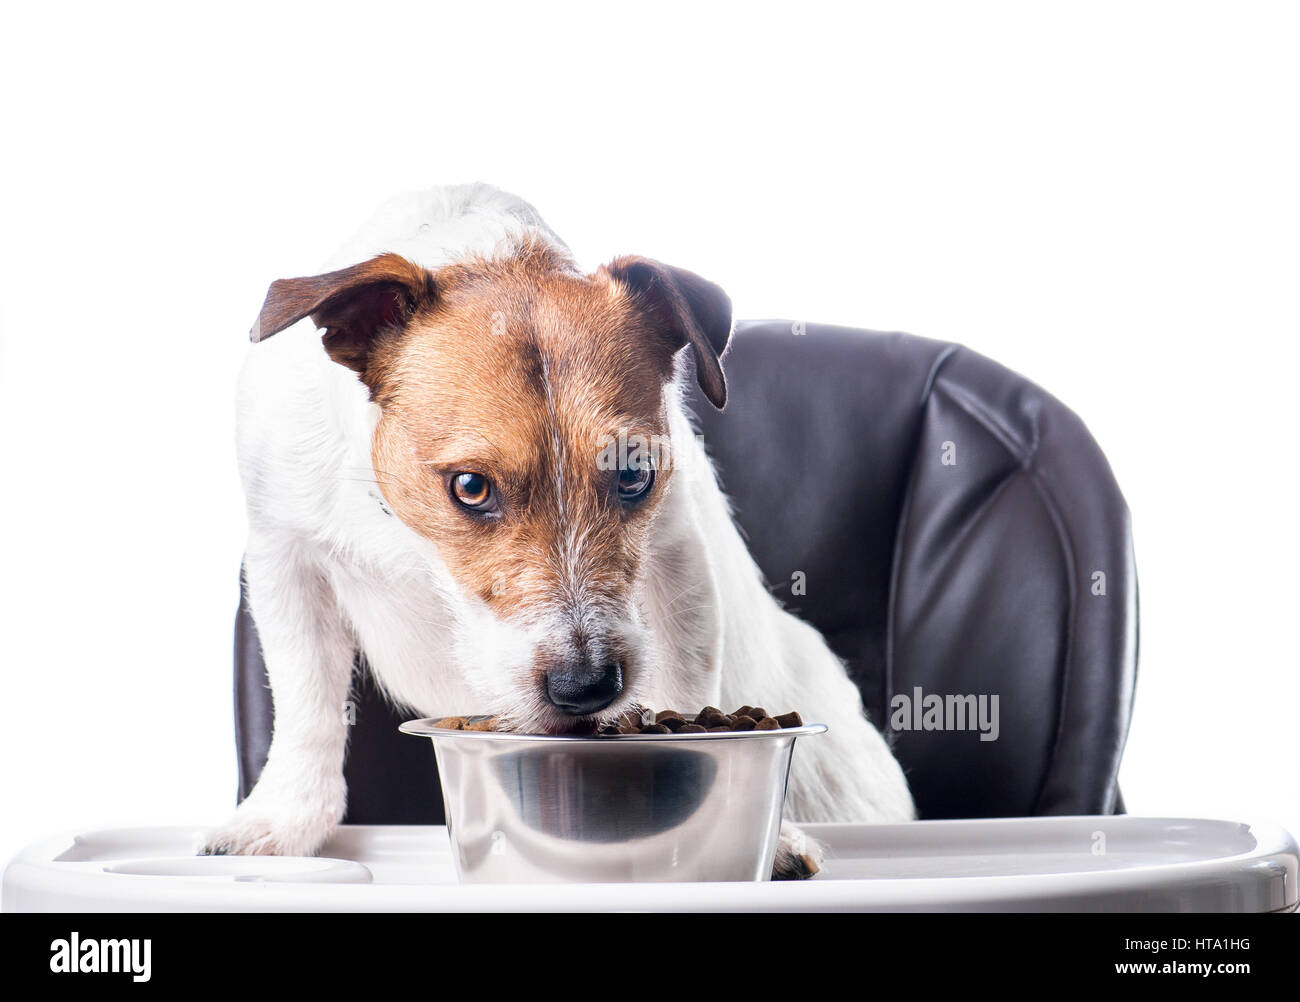 Dog eating its main course of dried meat food Stock Photo